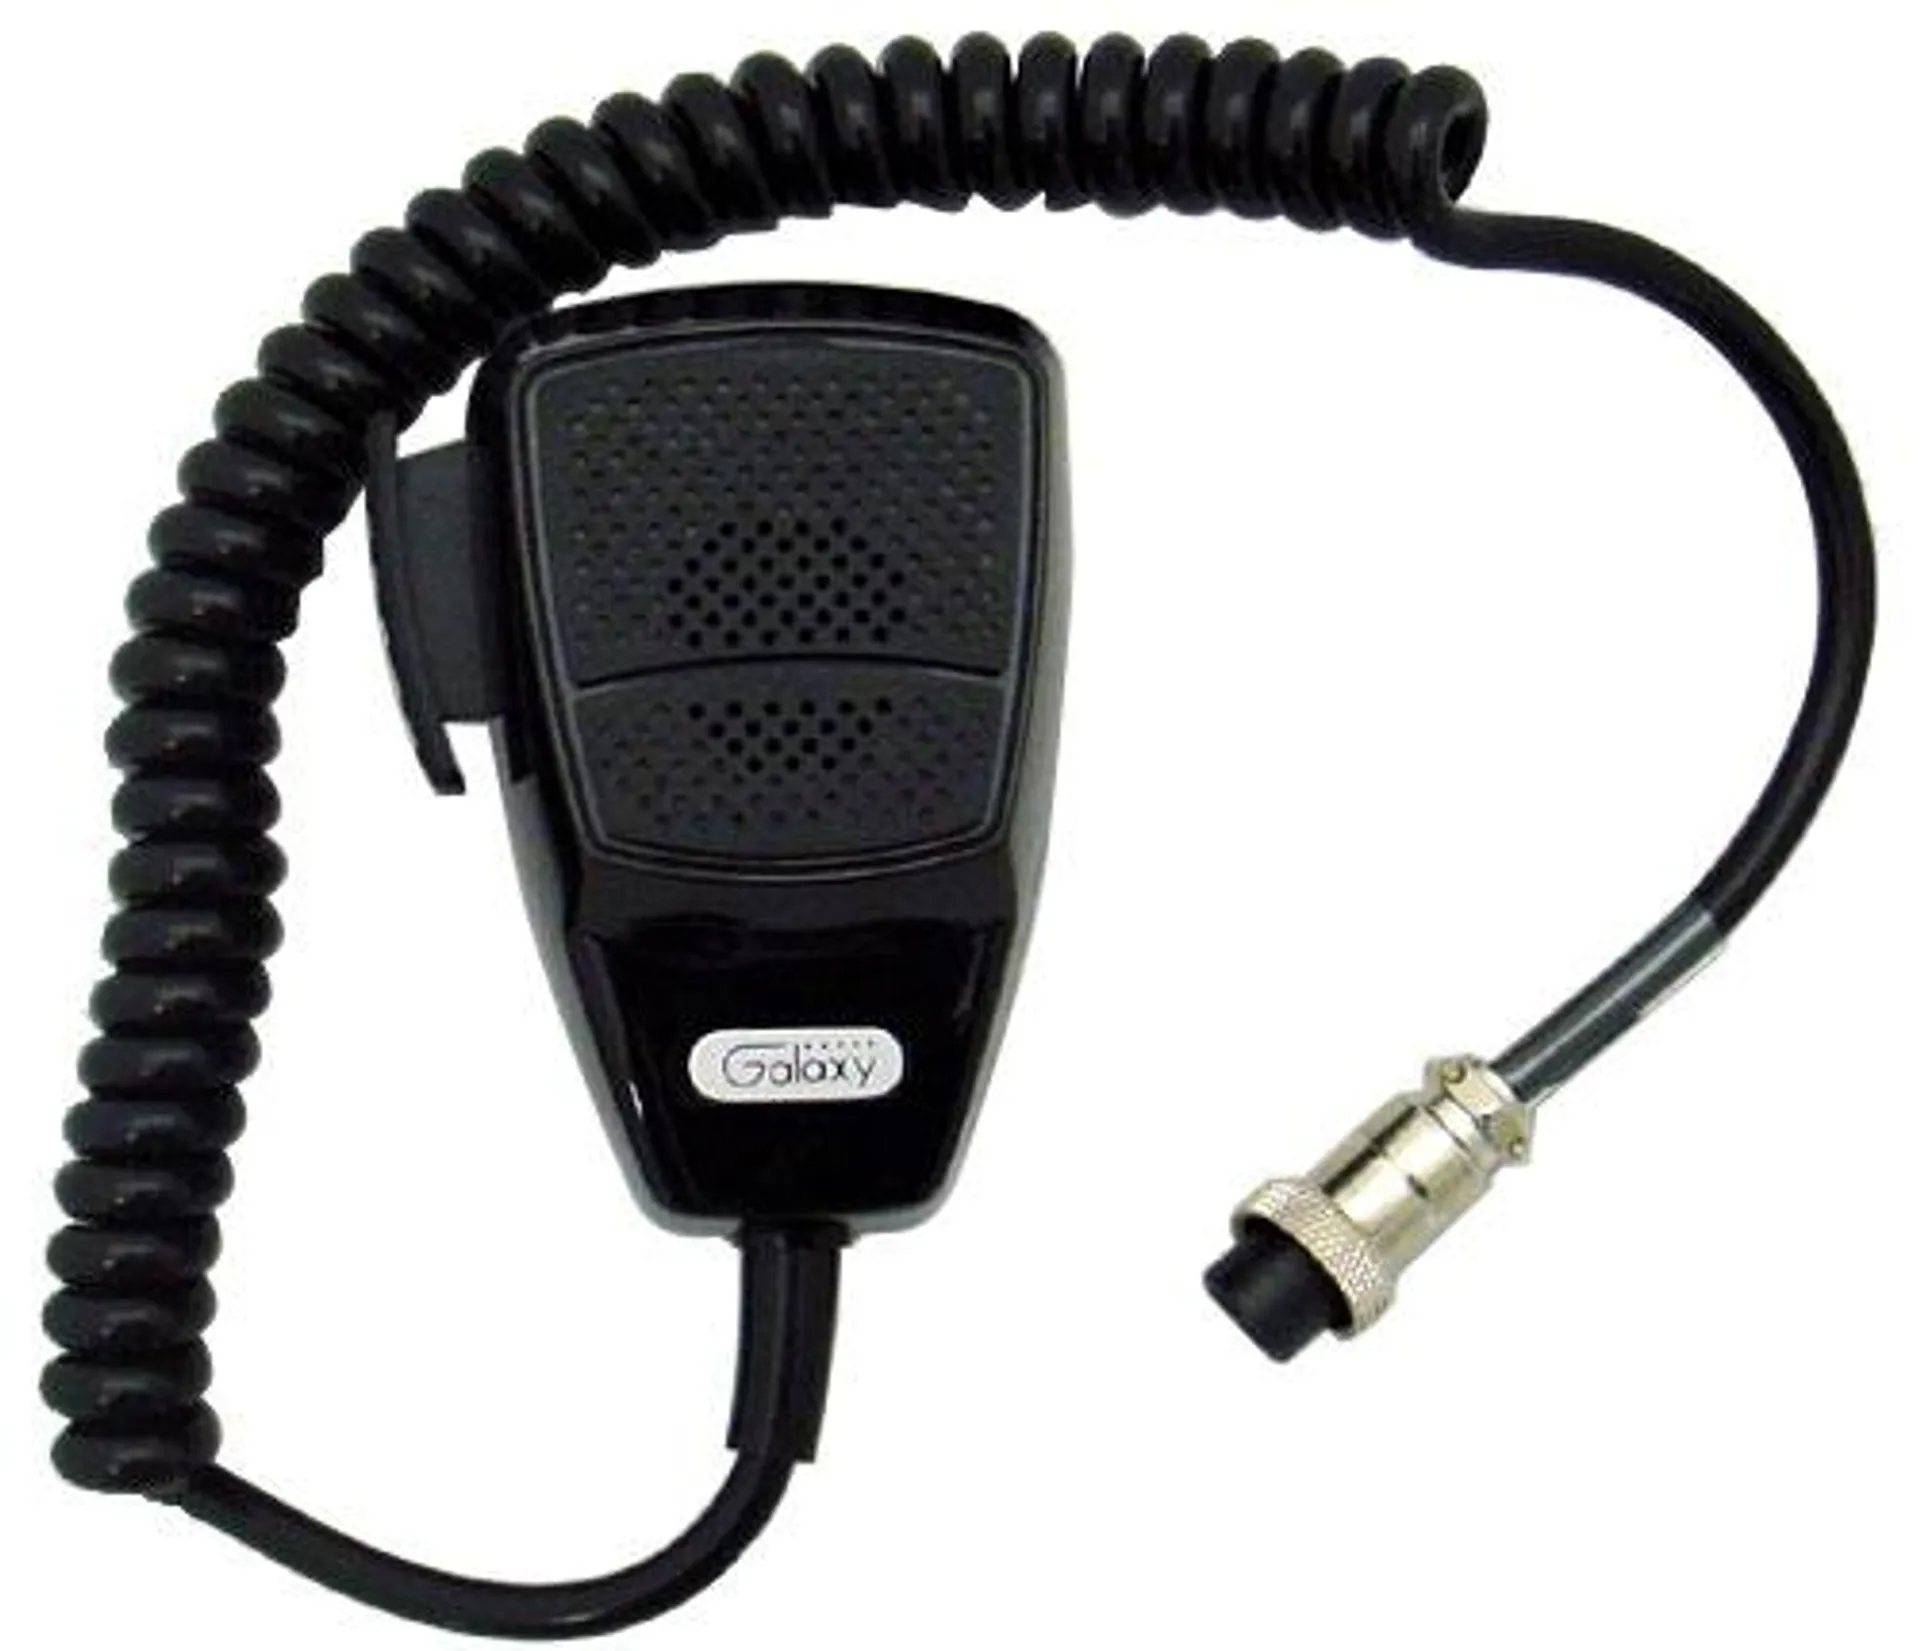 Galaxy DXMIC 4 Pin Mic For The Dx919-Dx929-Dx939-Dx979